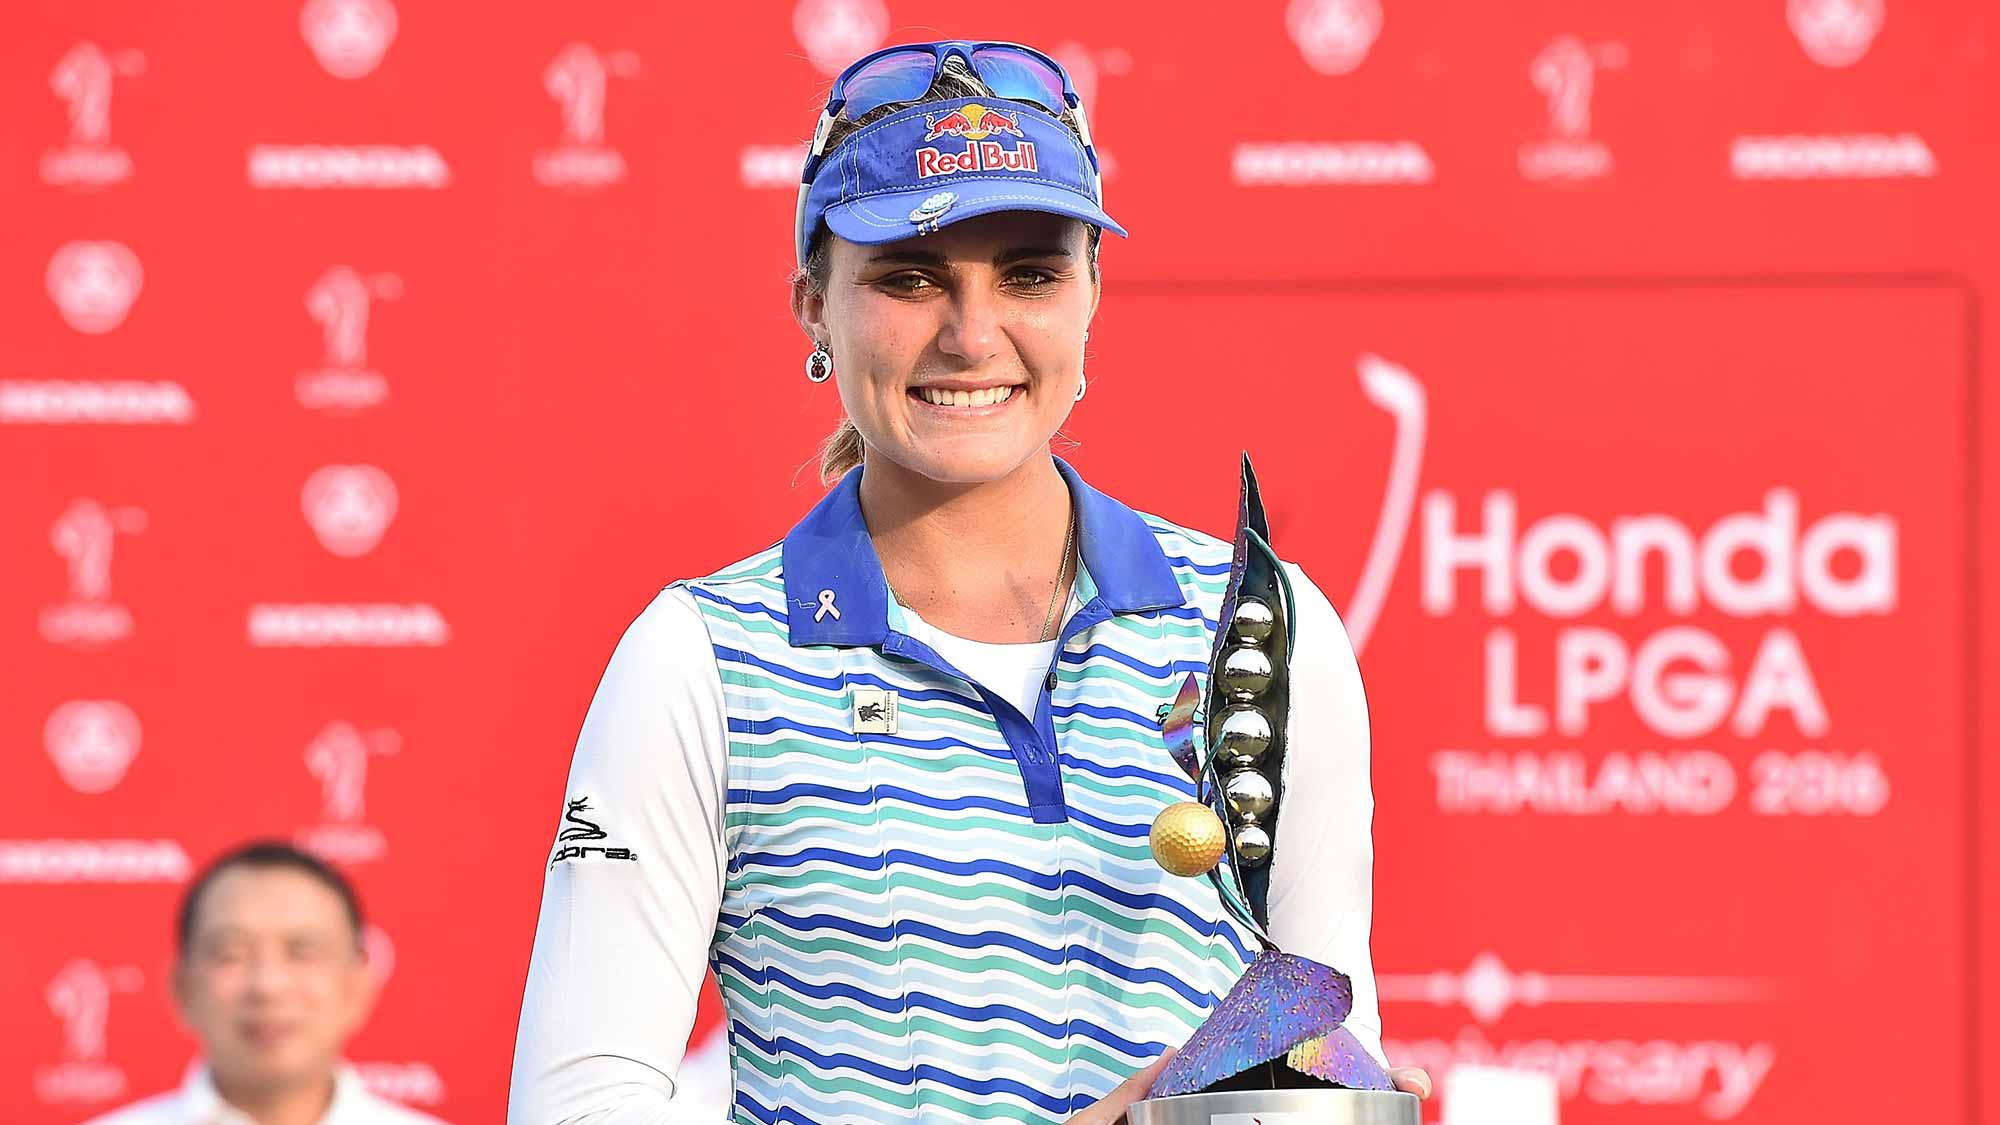 Lexi Thompson of the United States poses with the trophy after winning the 2016 Honda LPGA Thailand at Siam Country Club